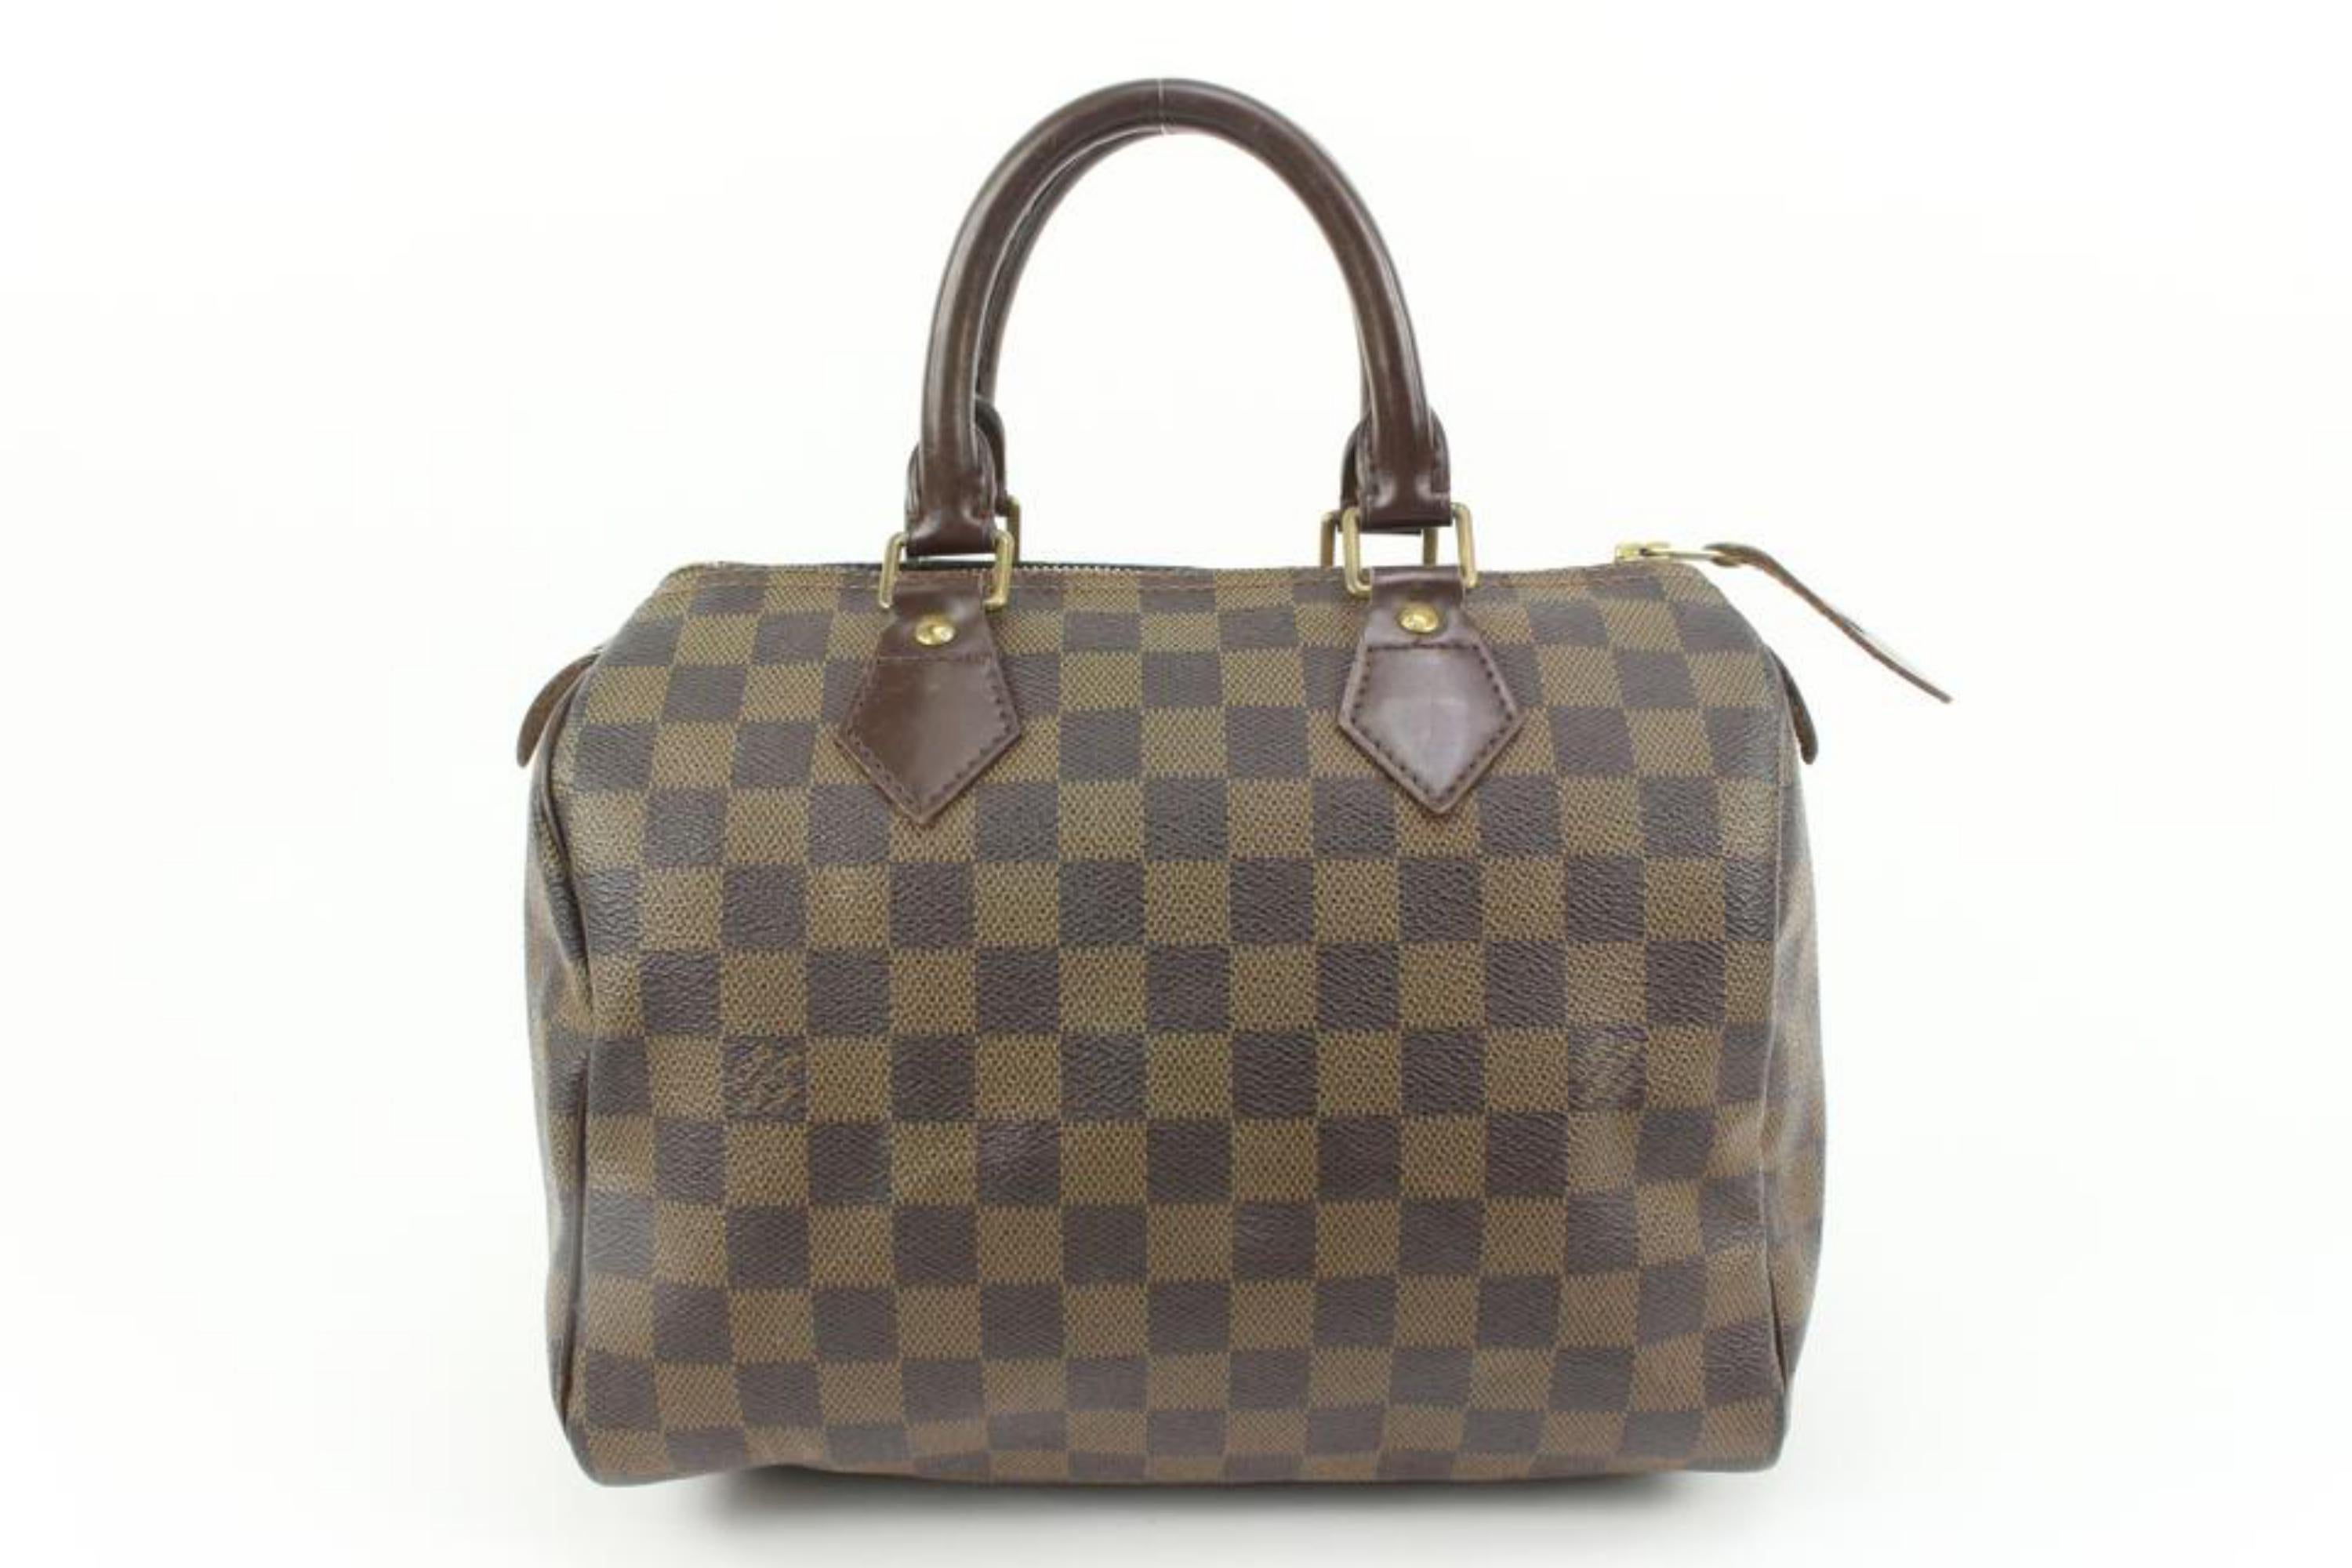 Louis Vuitton Small Damier Ebene Speedy 25 Boston Bag PM 87lv33s In Good Condition For Sale In Dix hills, NY